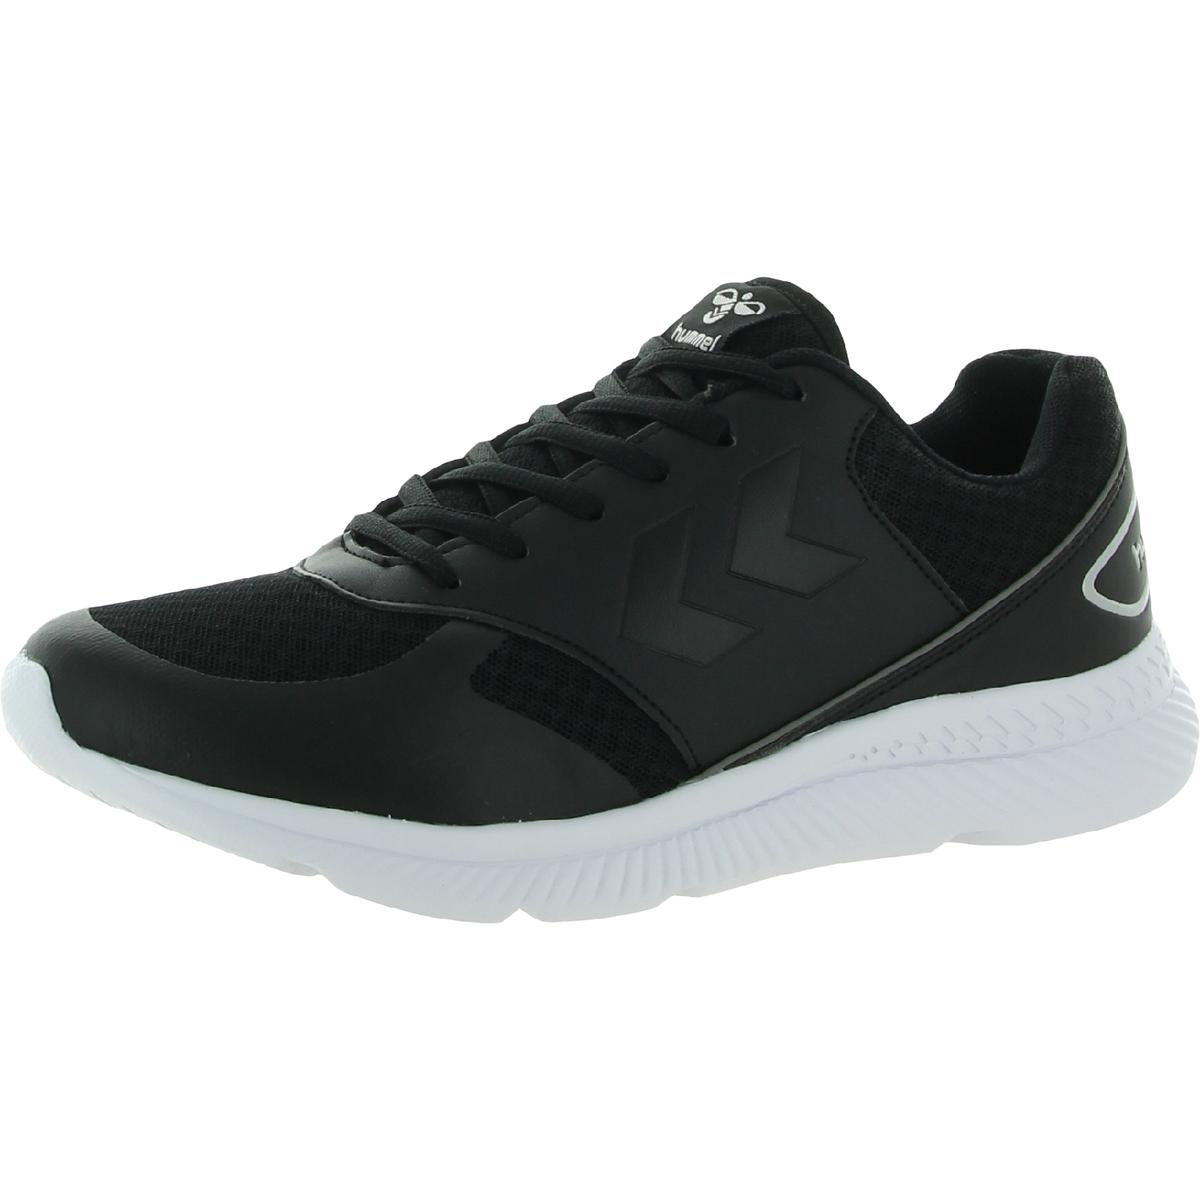 Hummel Mens Low Top and Fashion Shoes BHFO 3948 | eBay